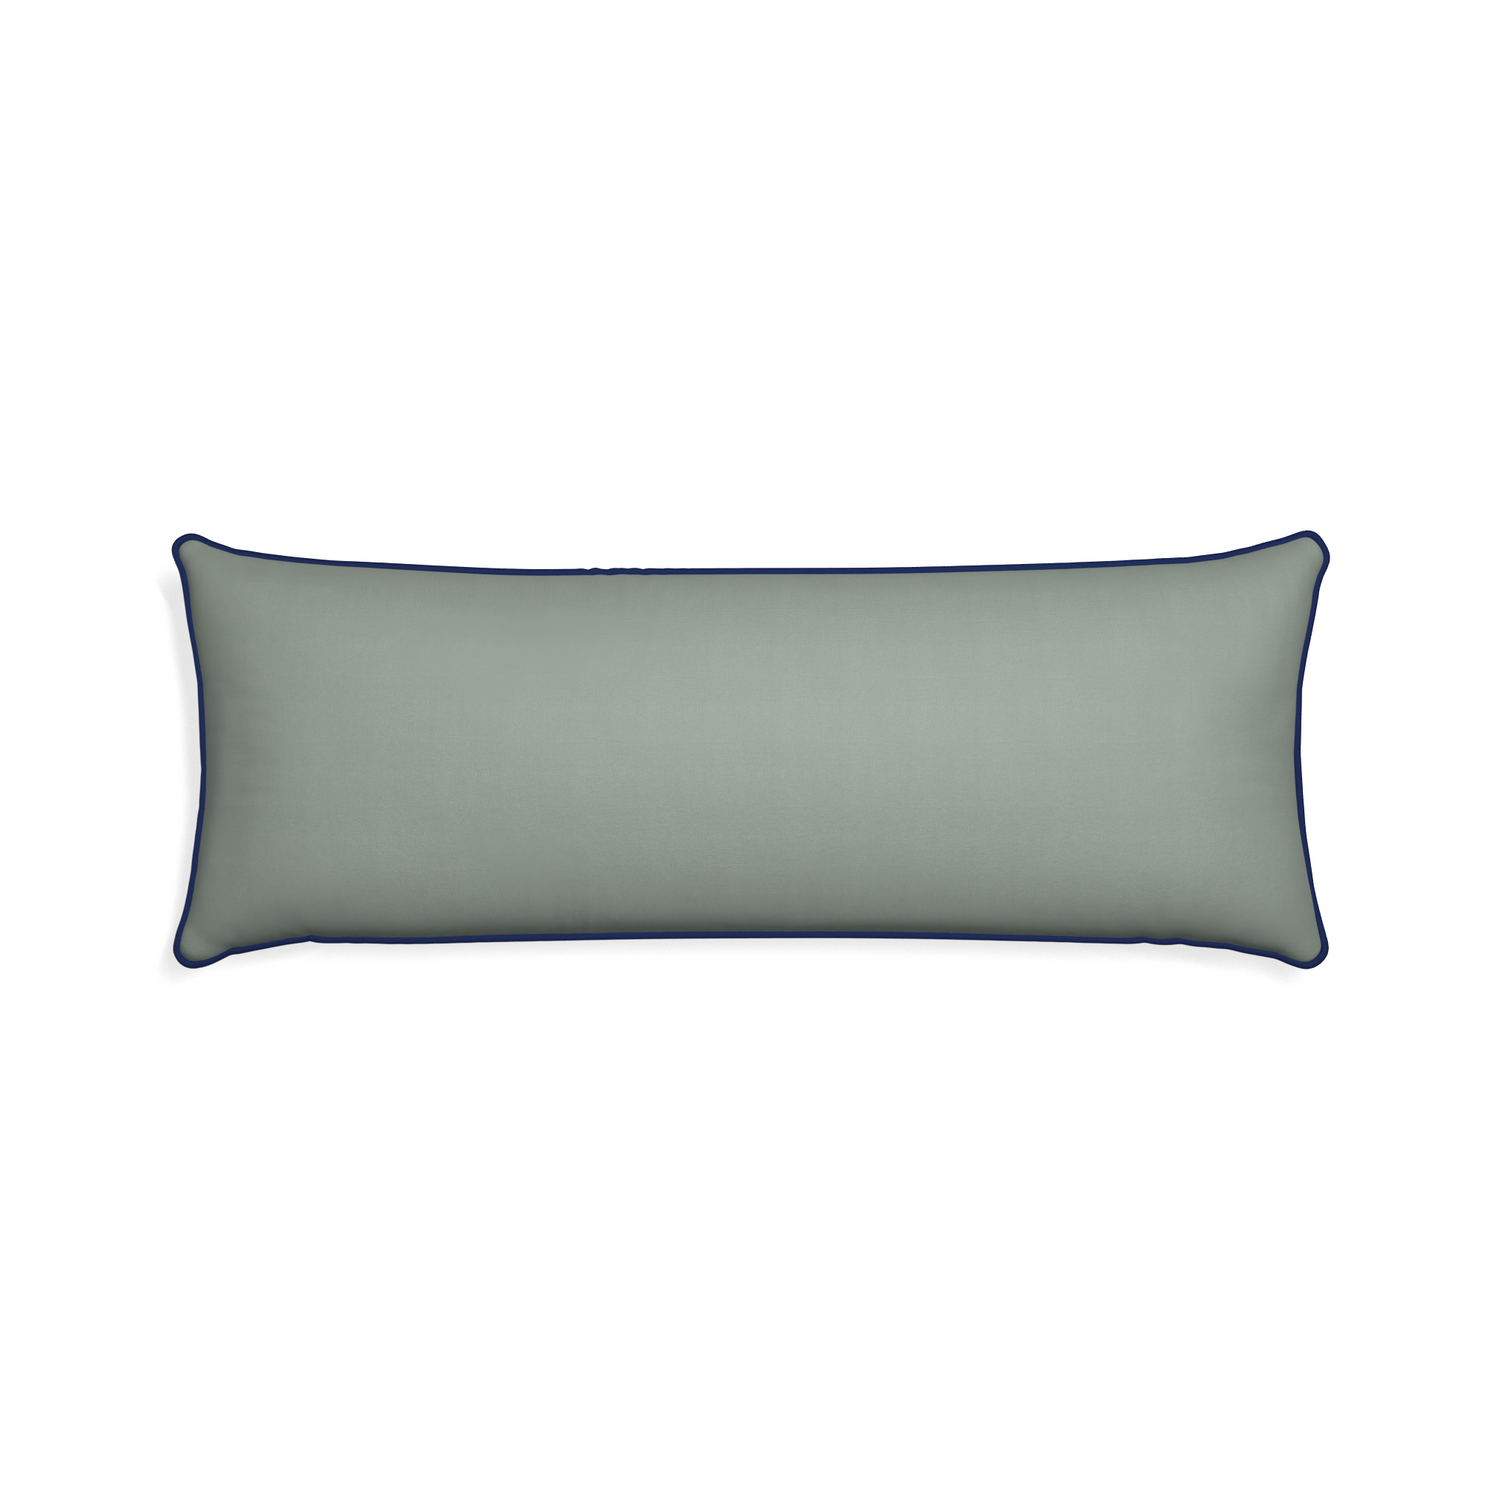 Xl-lumbar sage custom sage green cottonpillow with midnight piping on white background